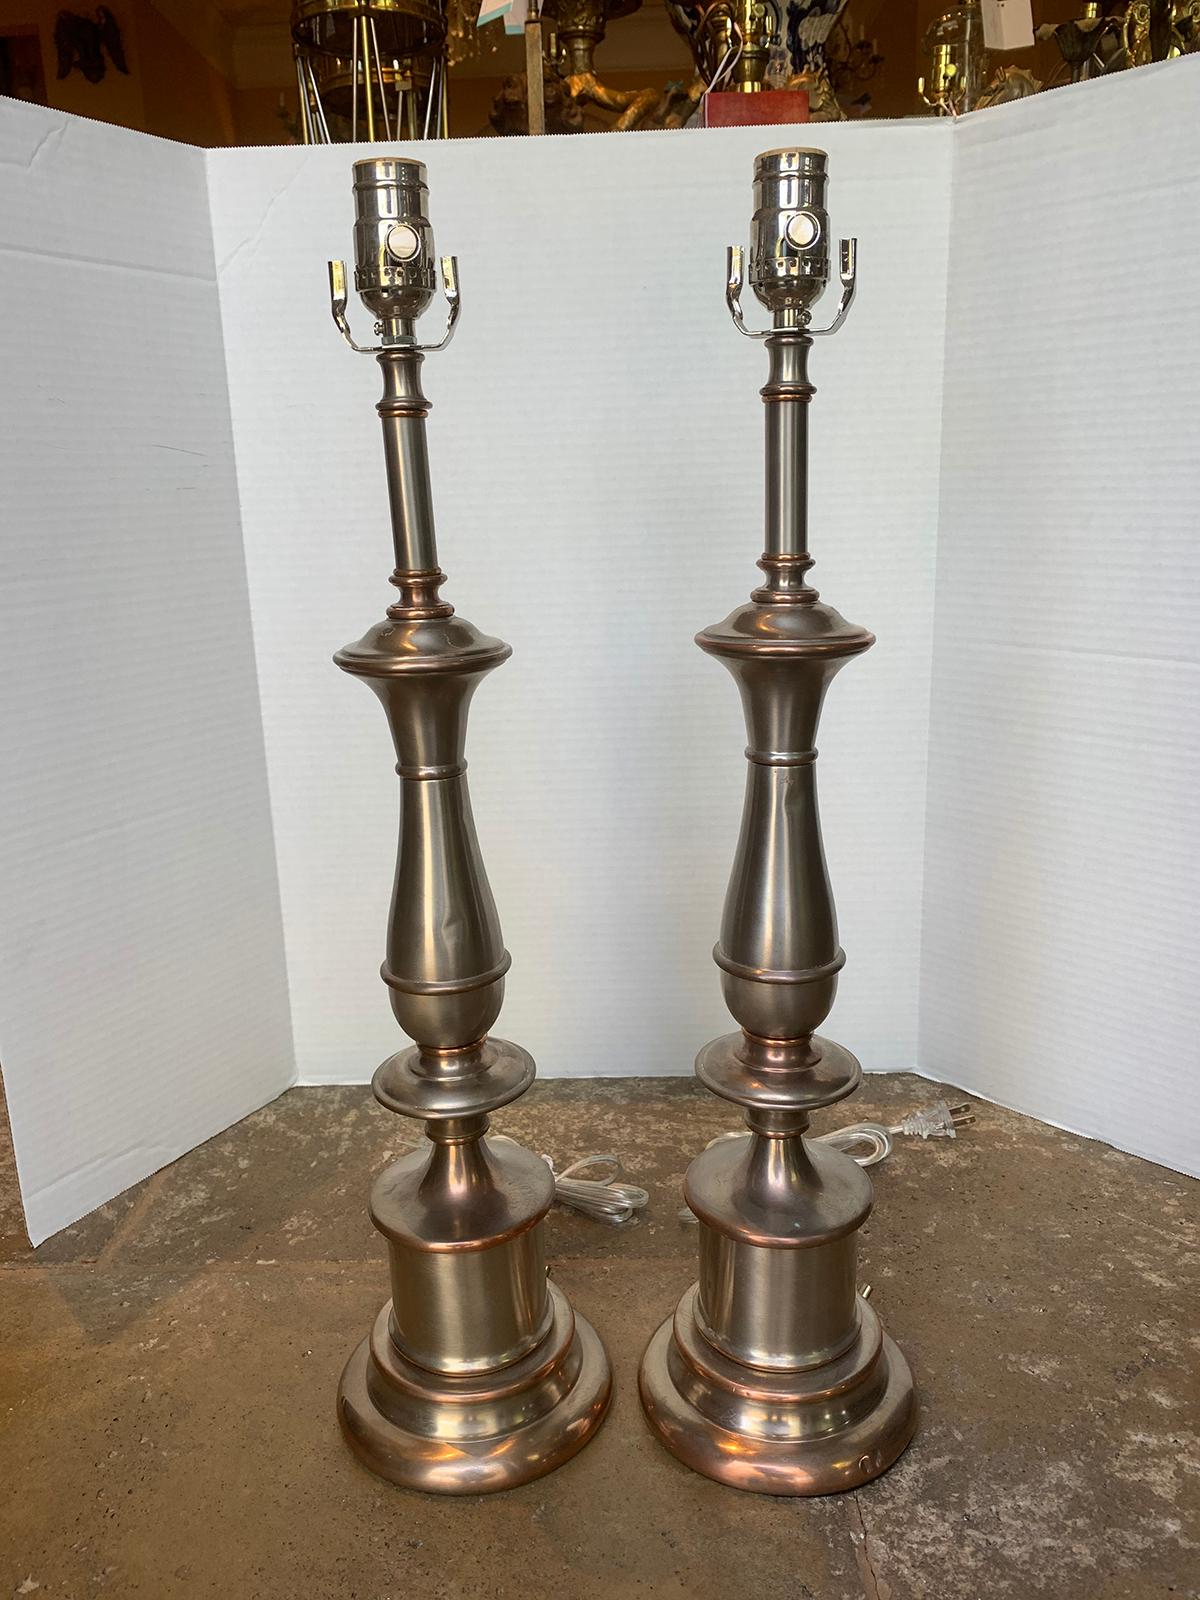 Pair of mid-20th century steel and brass lamps
New wiring.